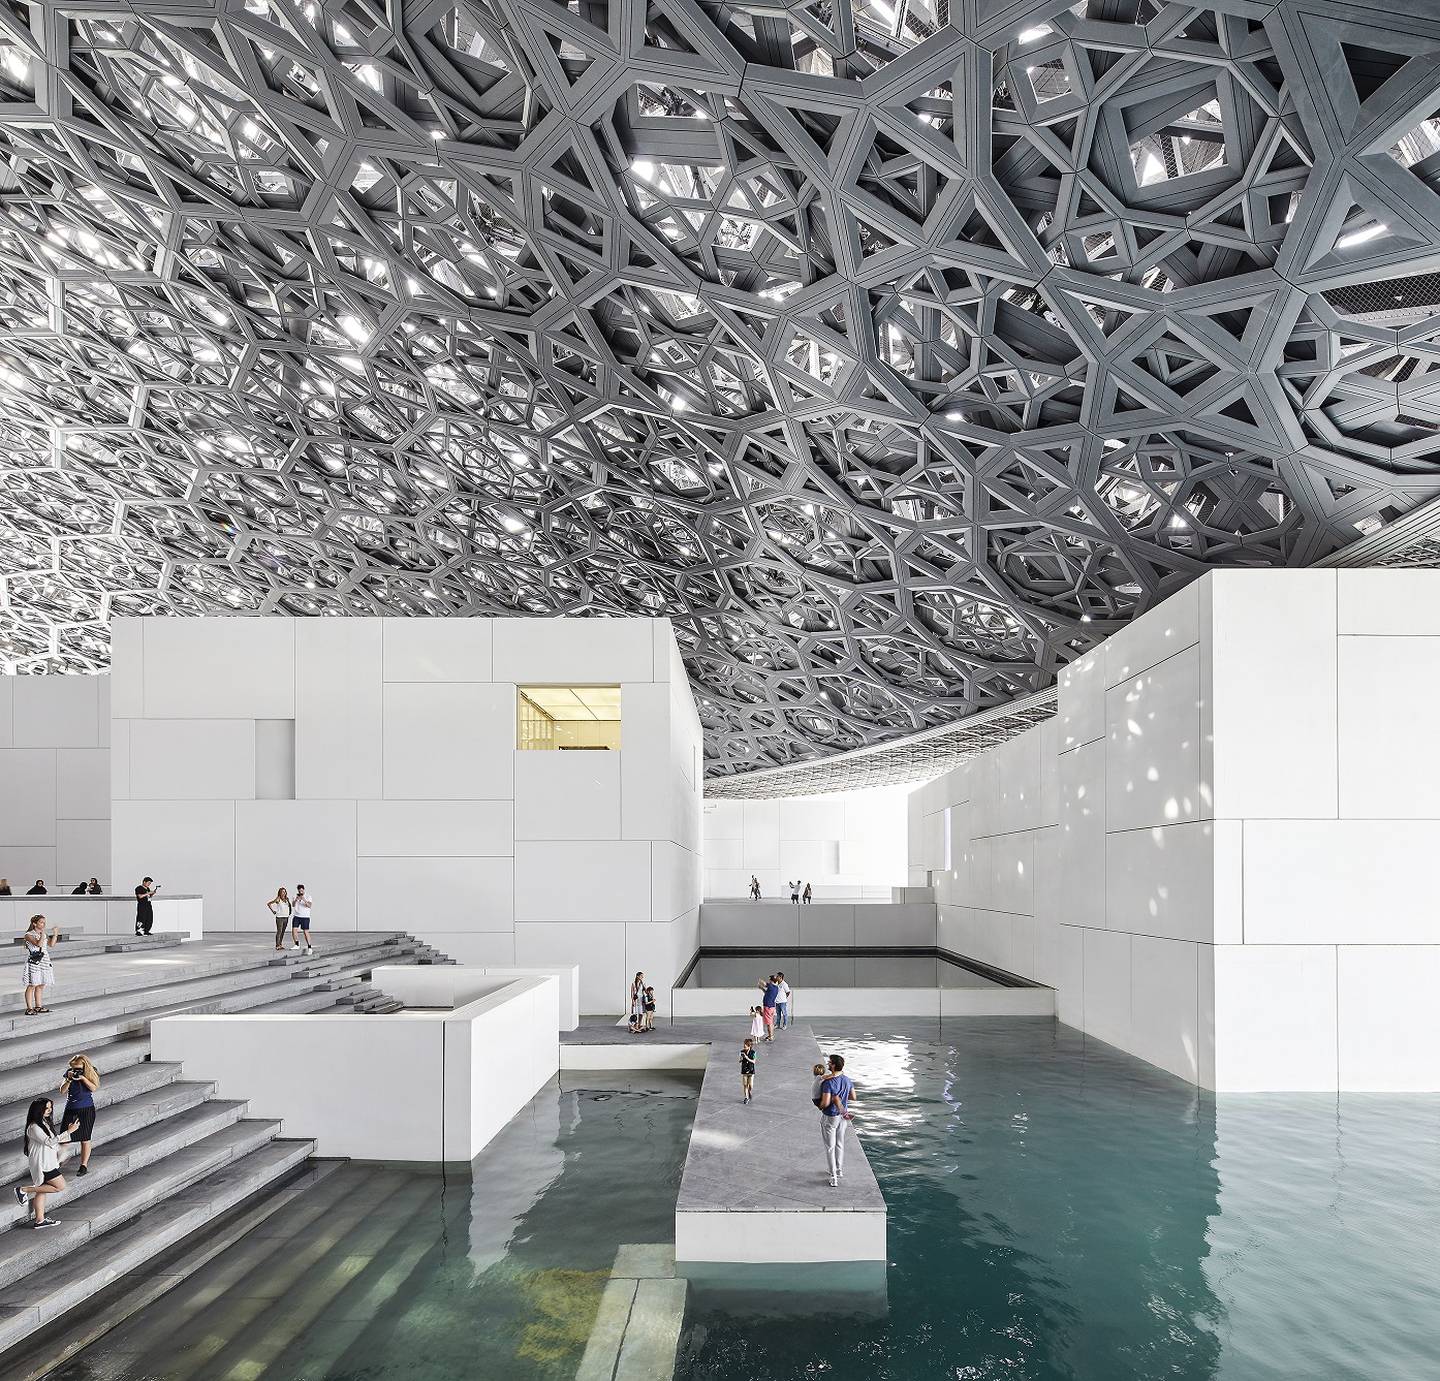 With the Jubilee Cultural Pass, you can get free entry to Louvre Abu Dhabi until December 31 